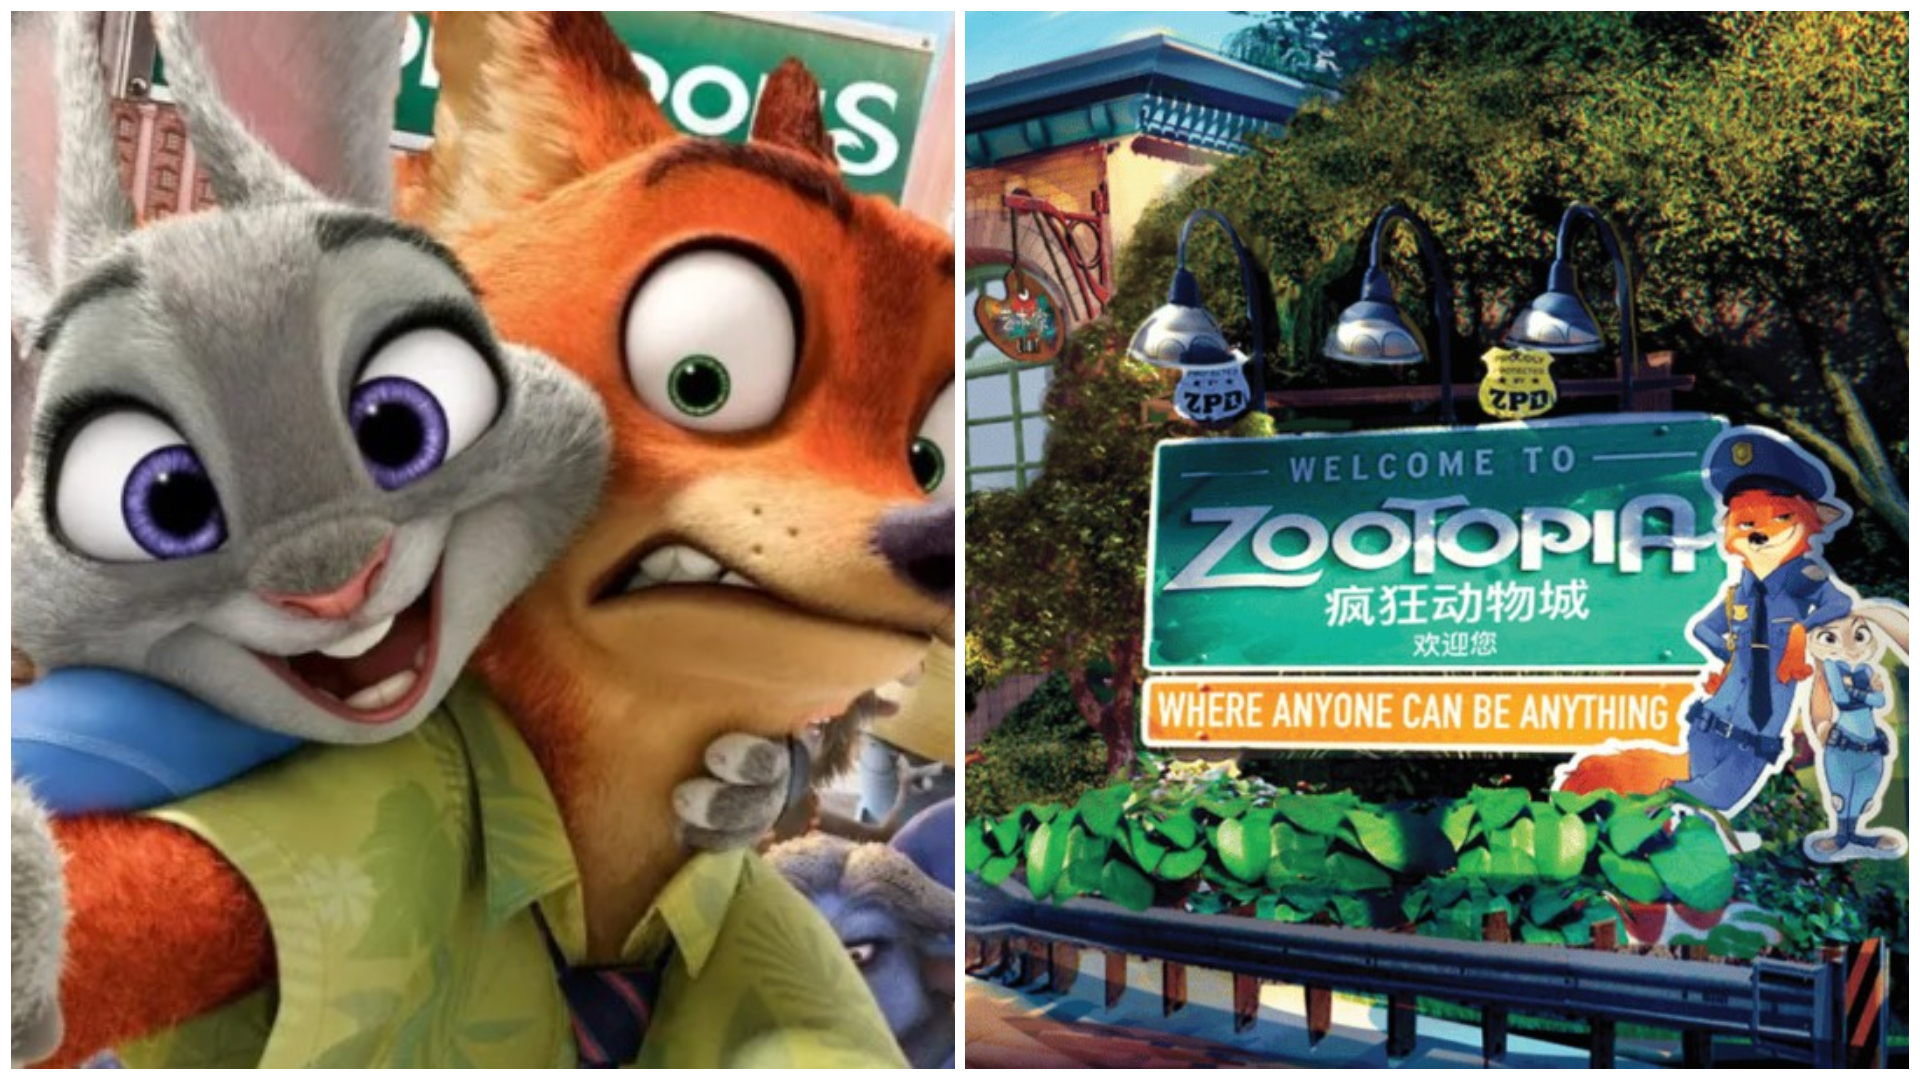 The World’s First Zootopia-themed Attraction Opens at Shanghai ...